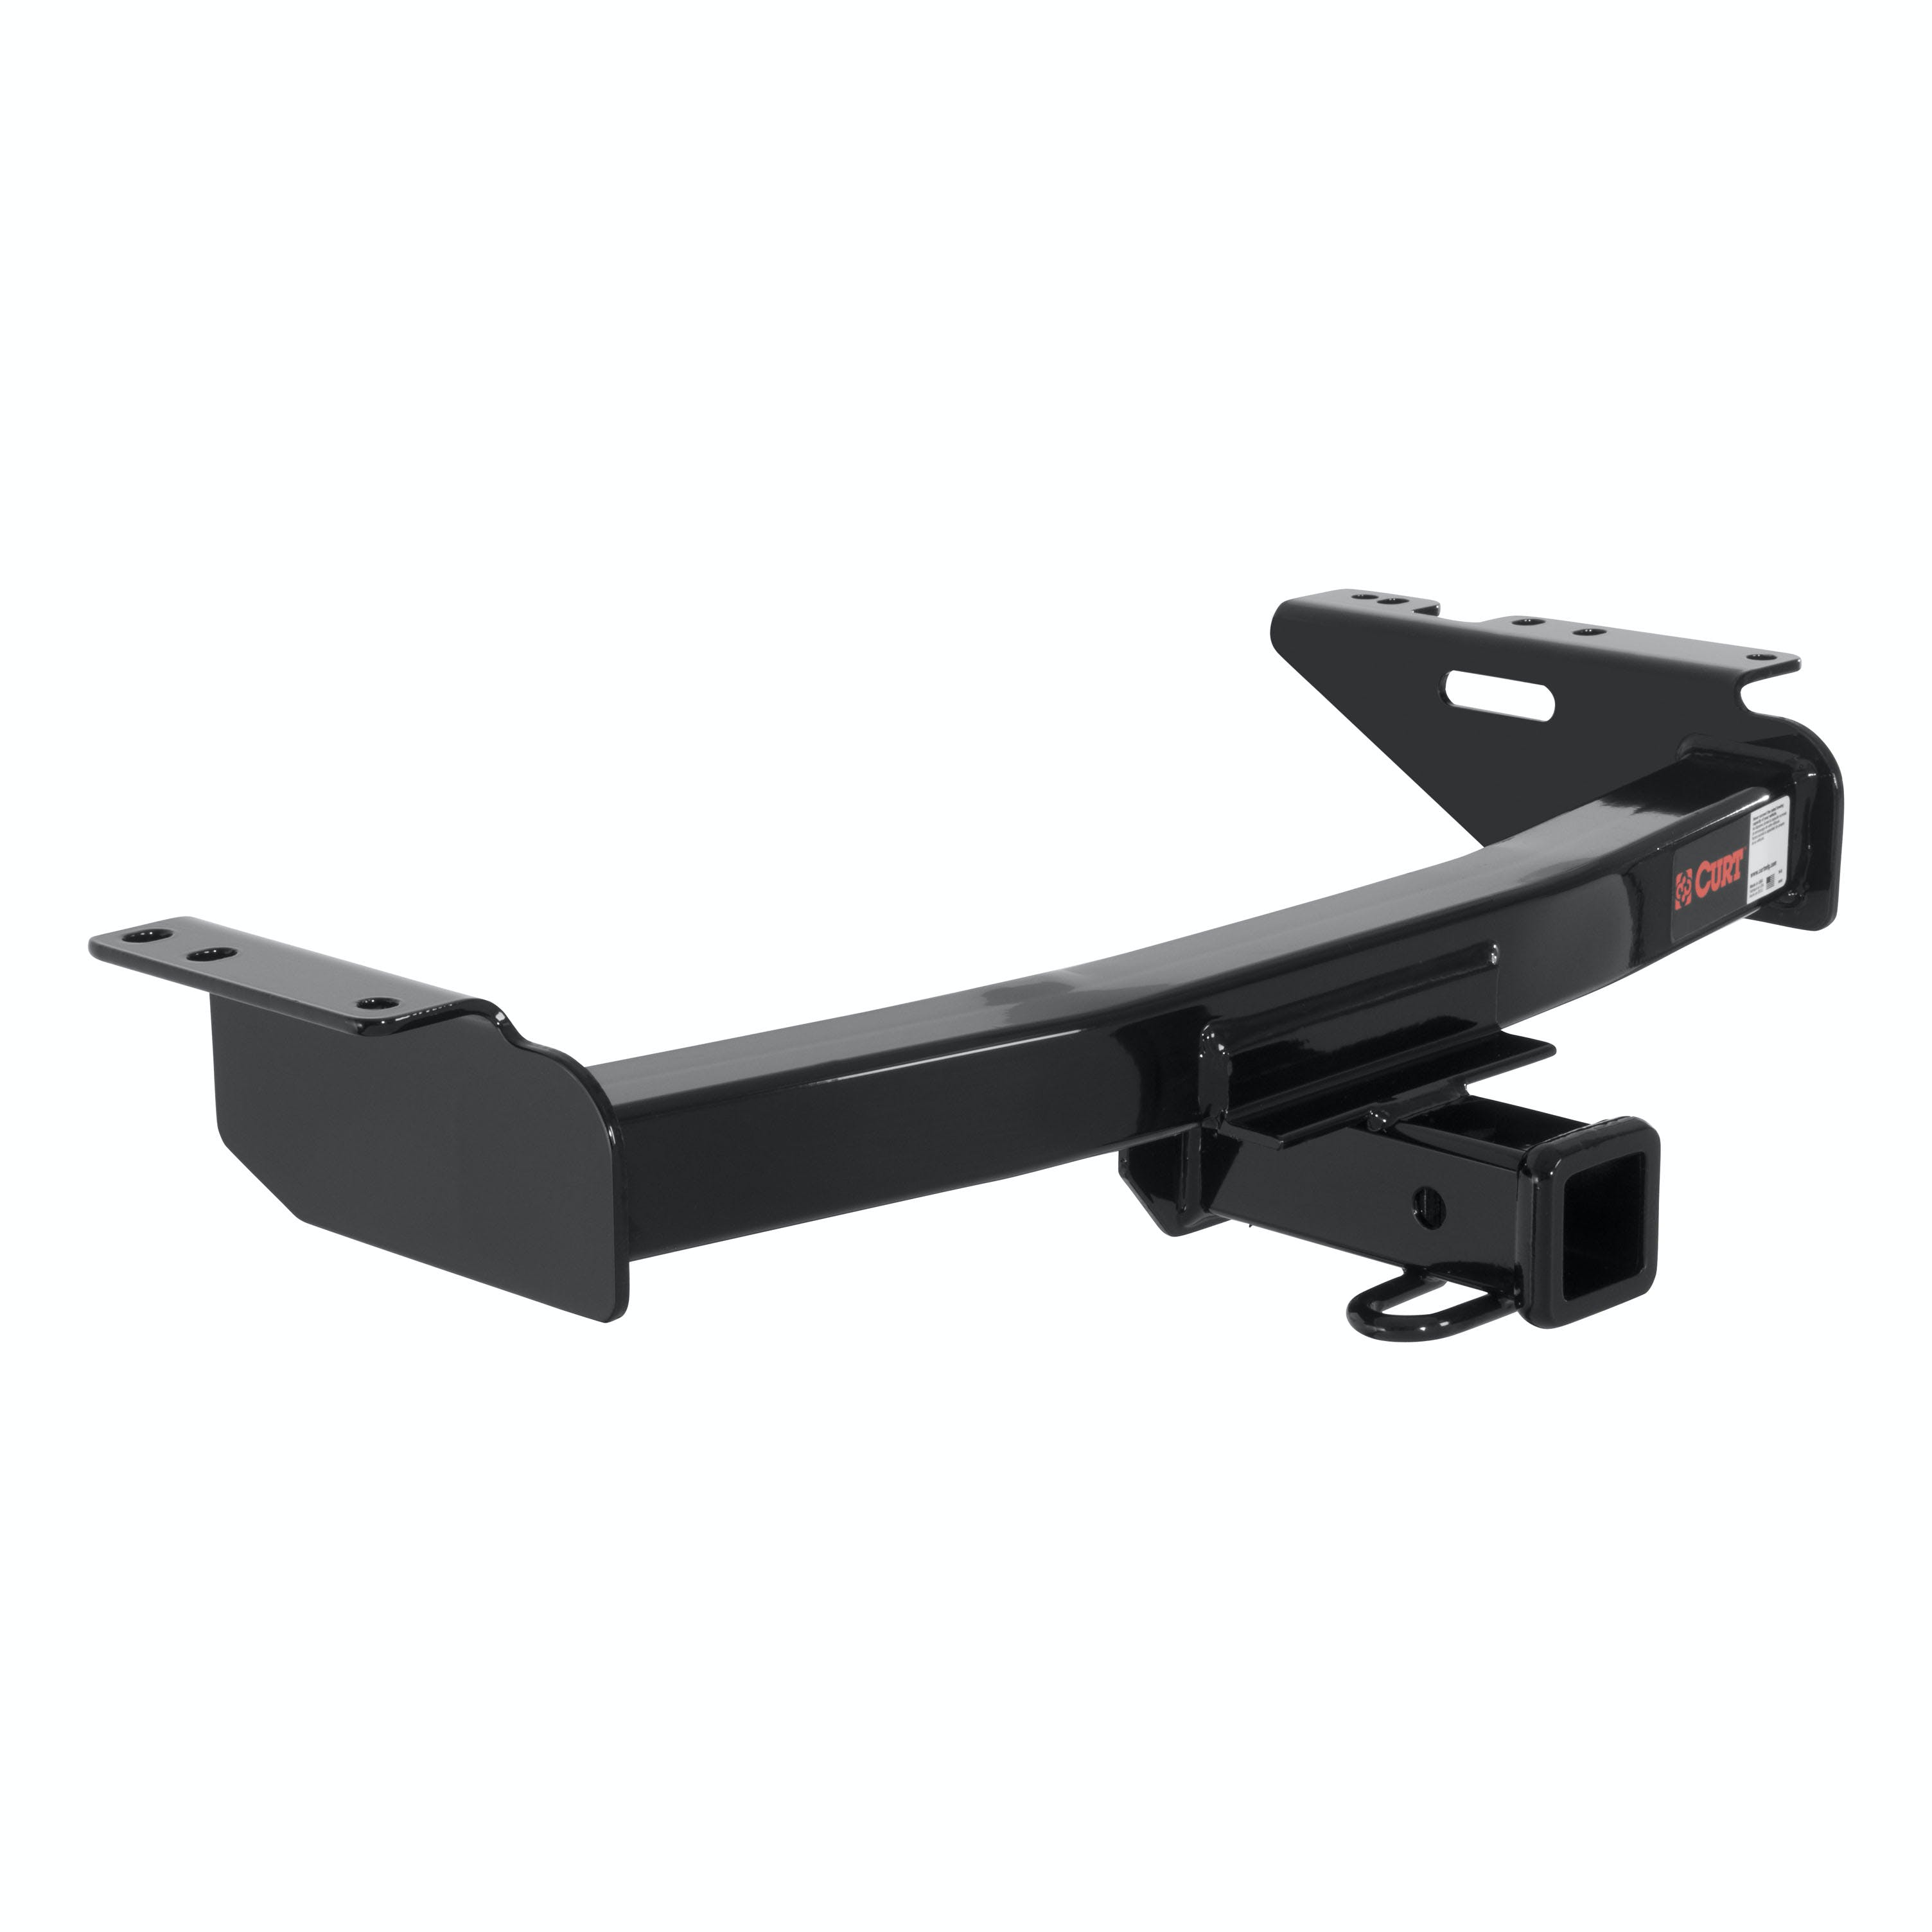 CURT 13344 Class 3 Hitch, 2, Select Buick, Chevy, Oldsmobile, Pontiac (Concealed)